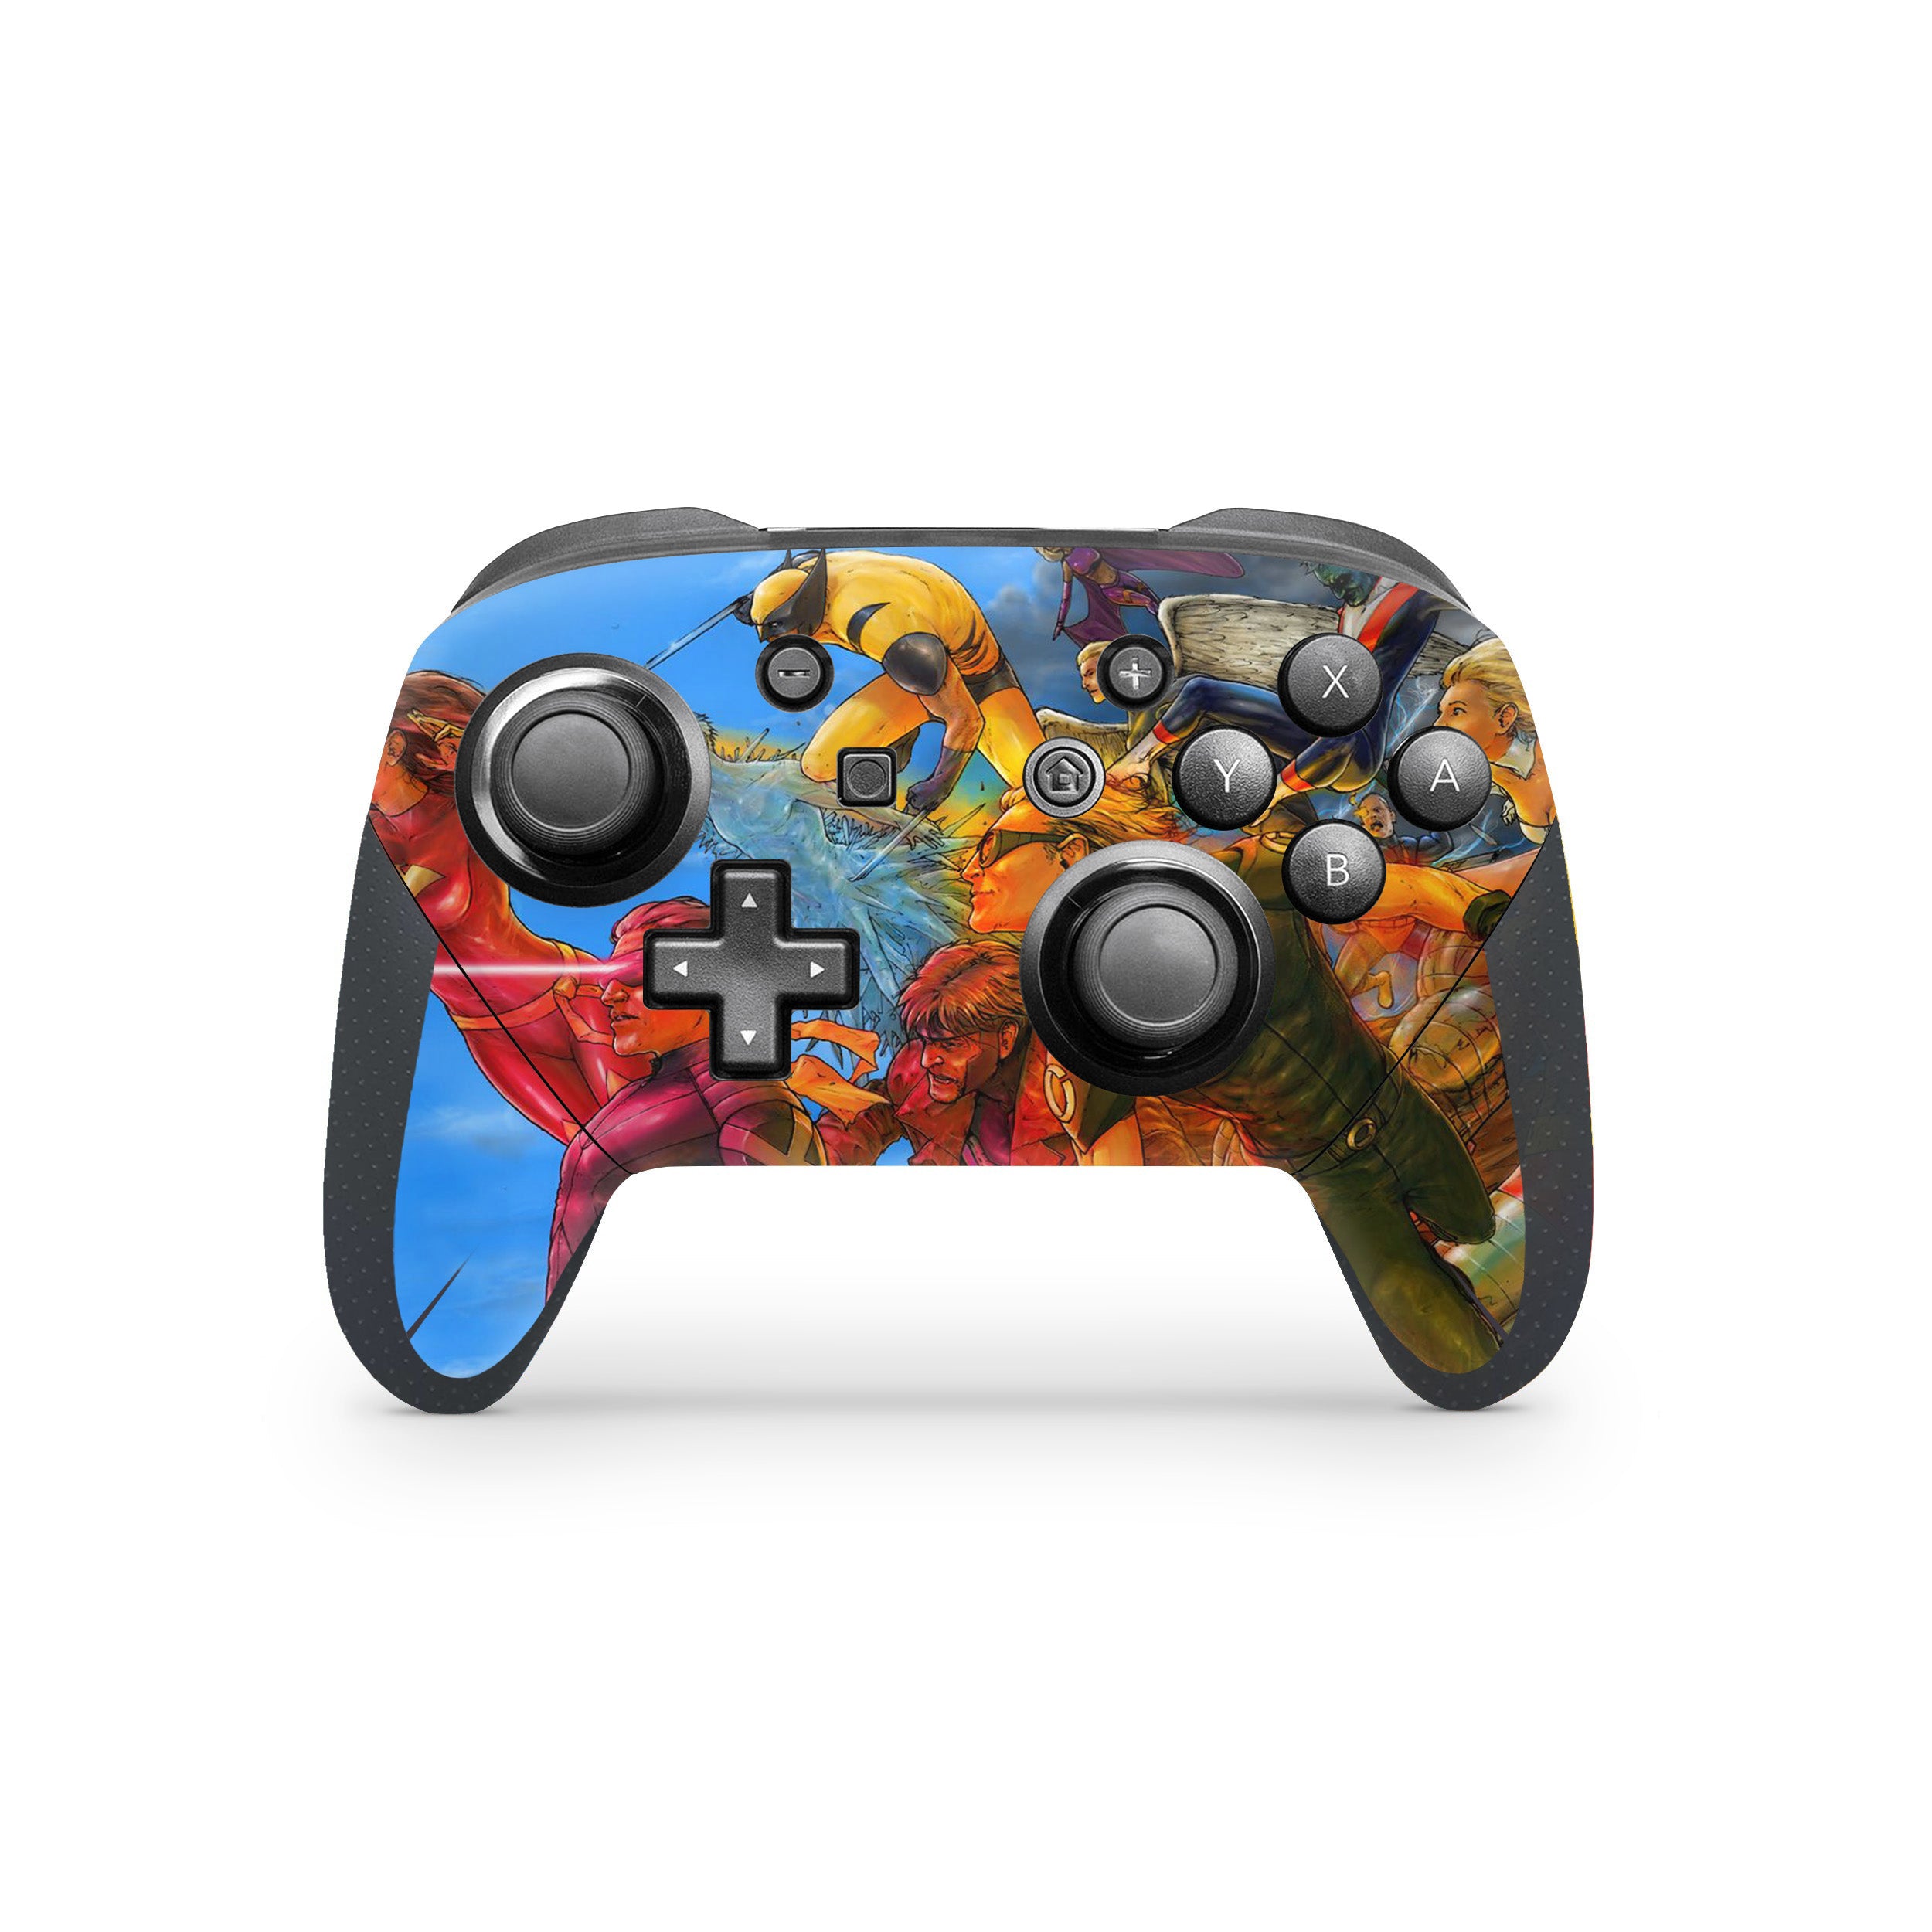 A video game skin featuring a Marvel X Men design for the Switch Pro Controller.